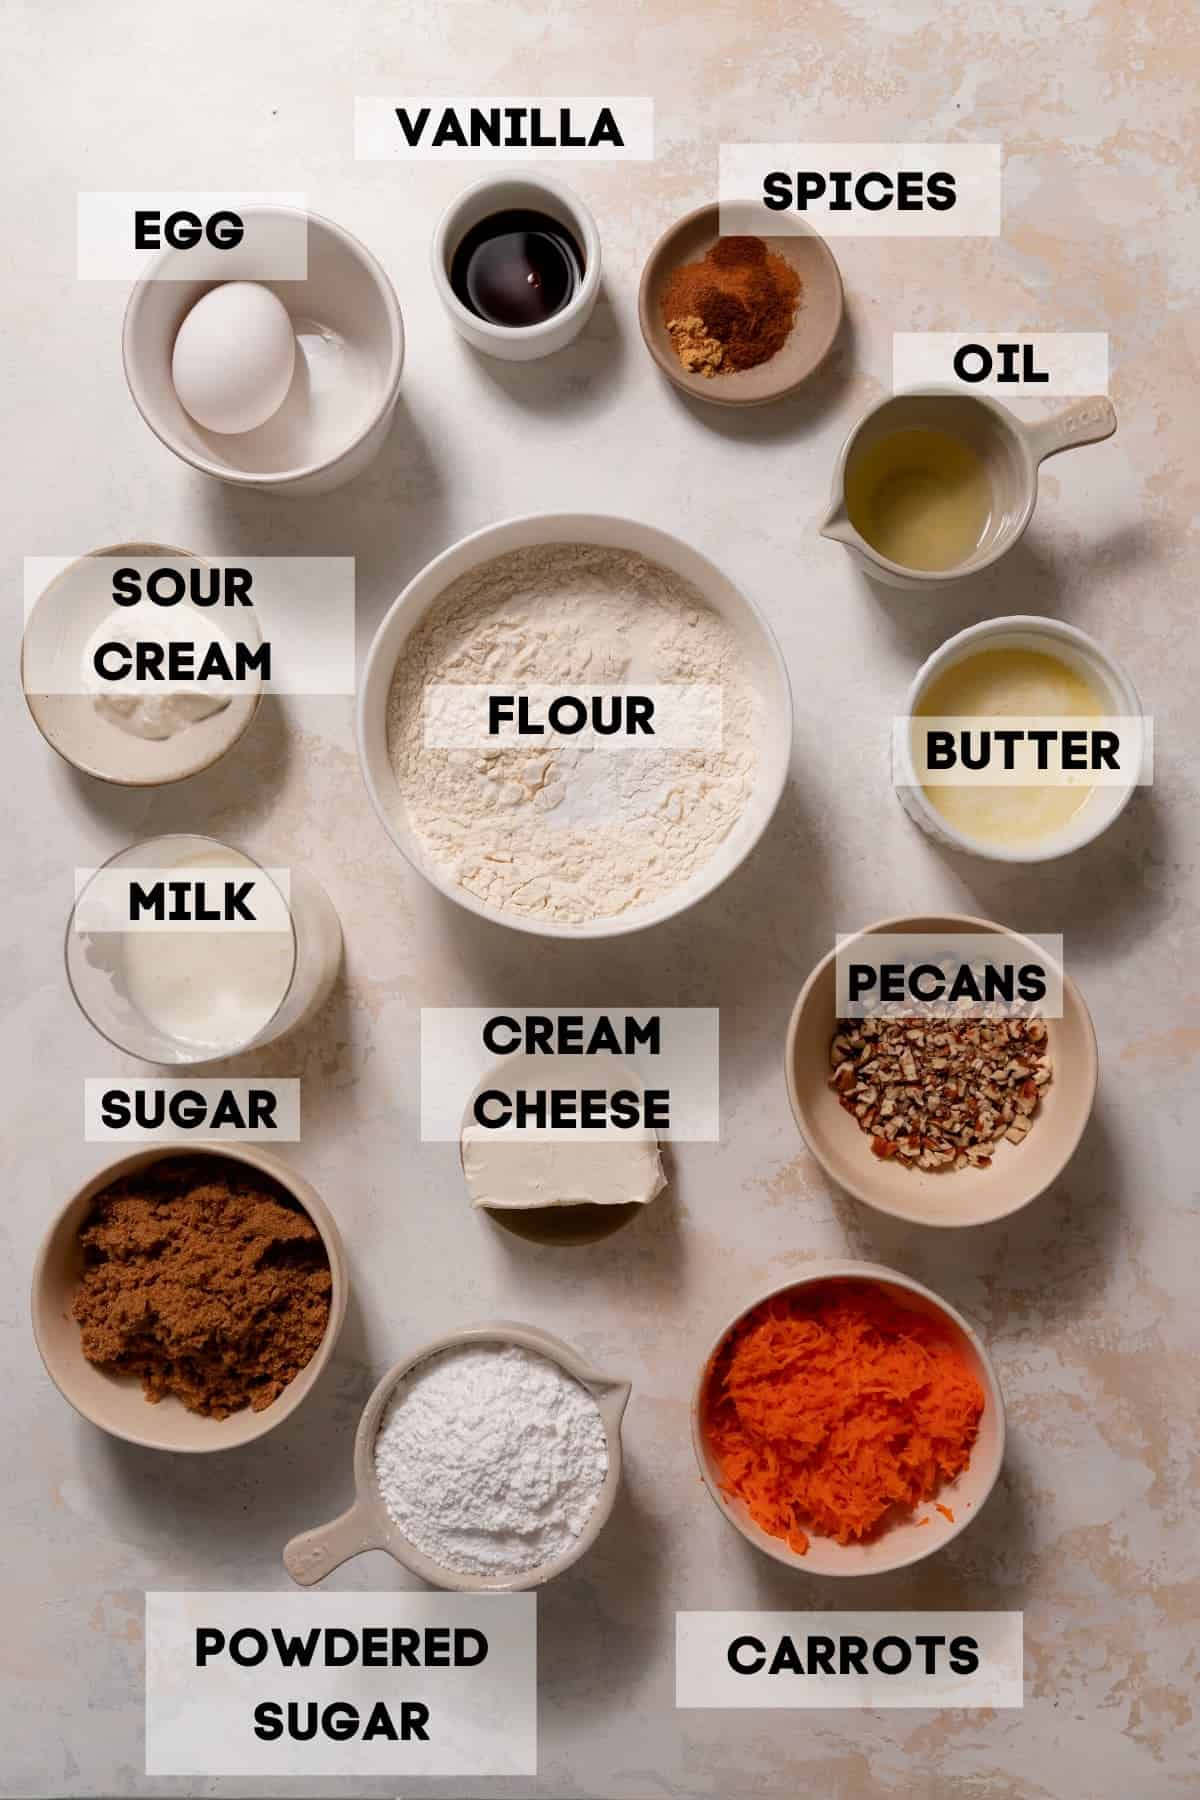 ingredients needed to make baked carrot donuts.